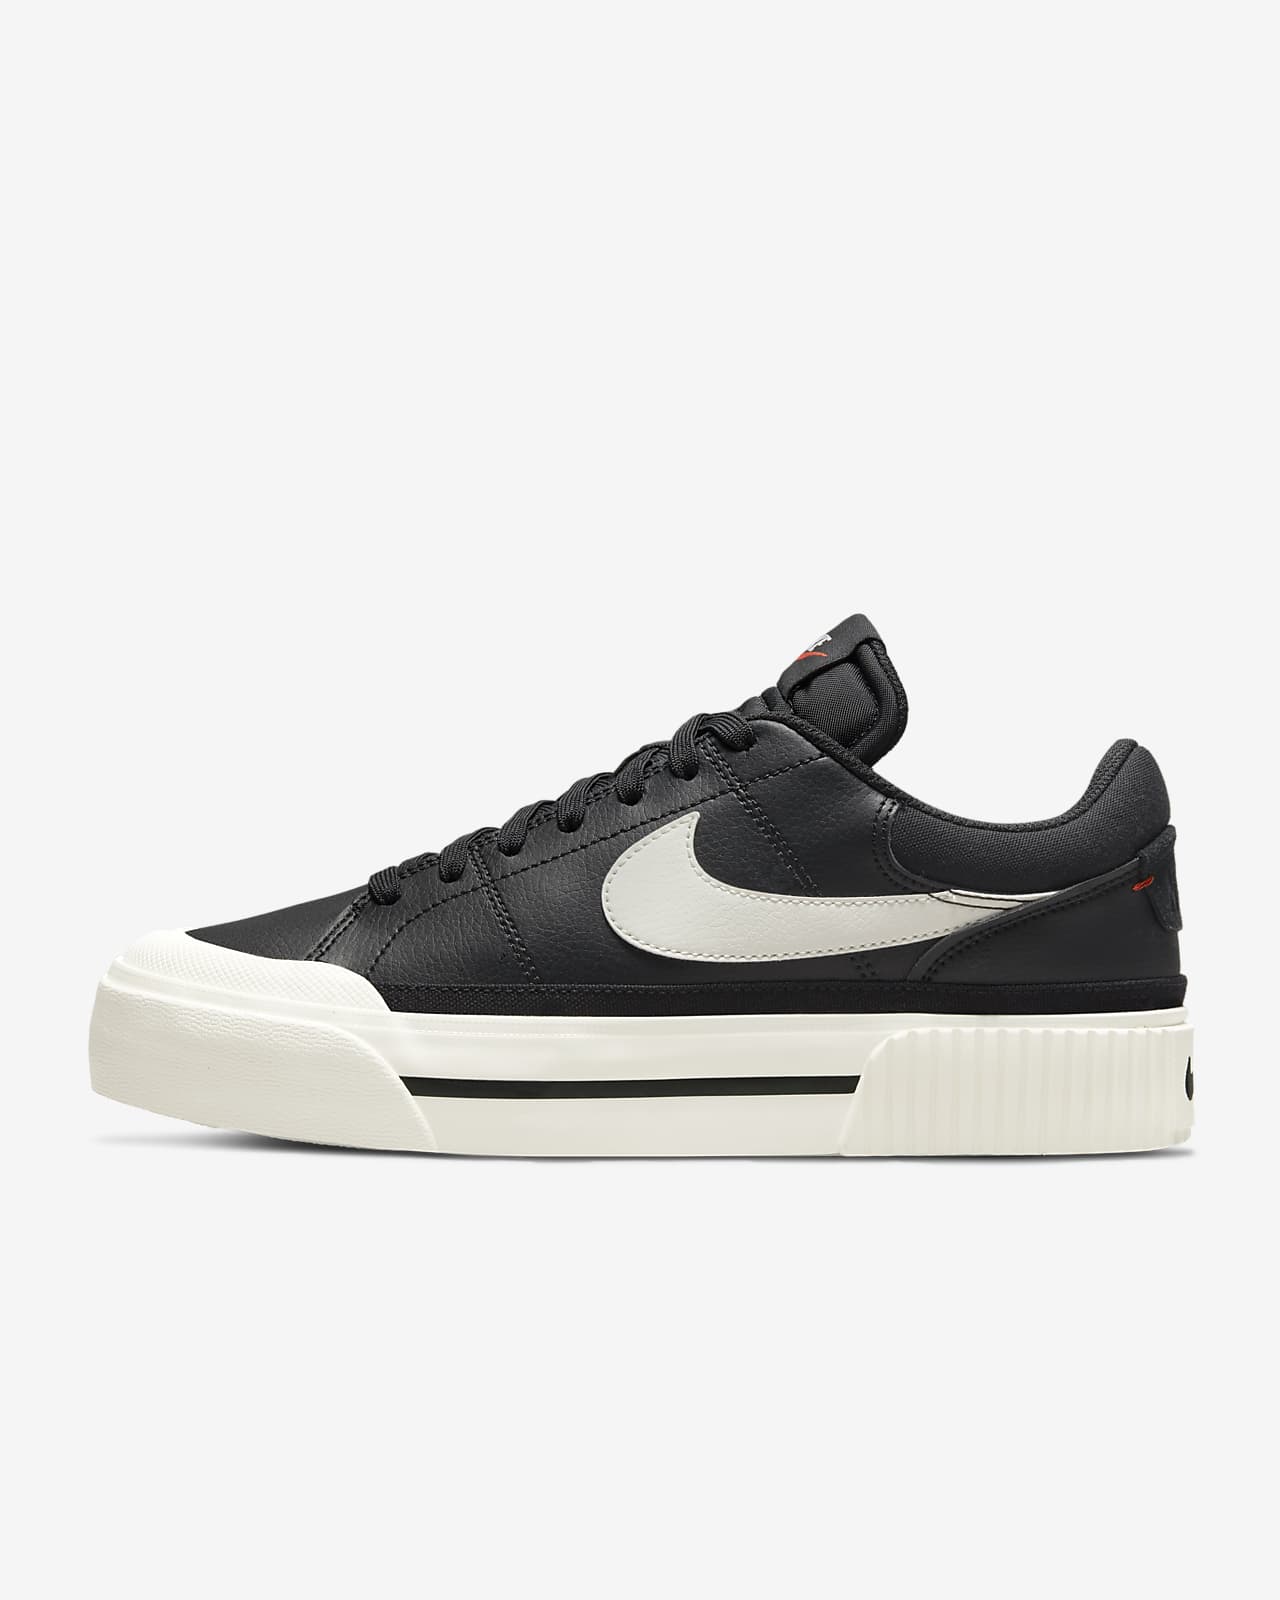 Chaussures Nike Court Legacy Lift pour Femme